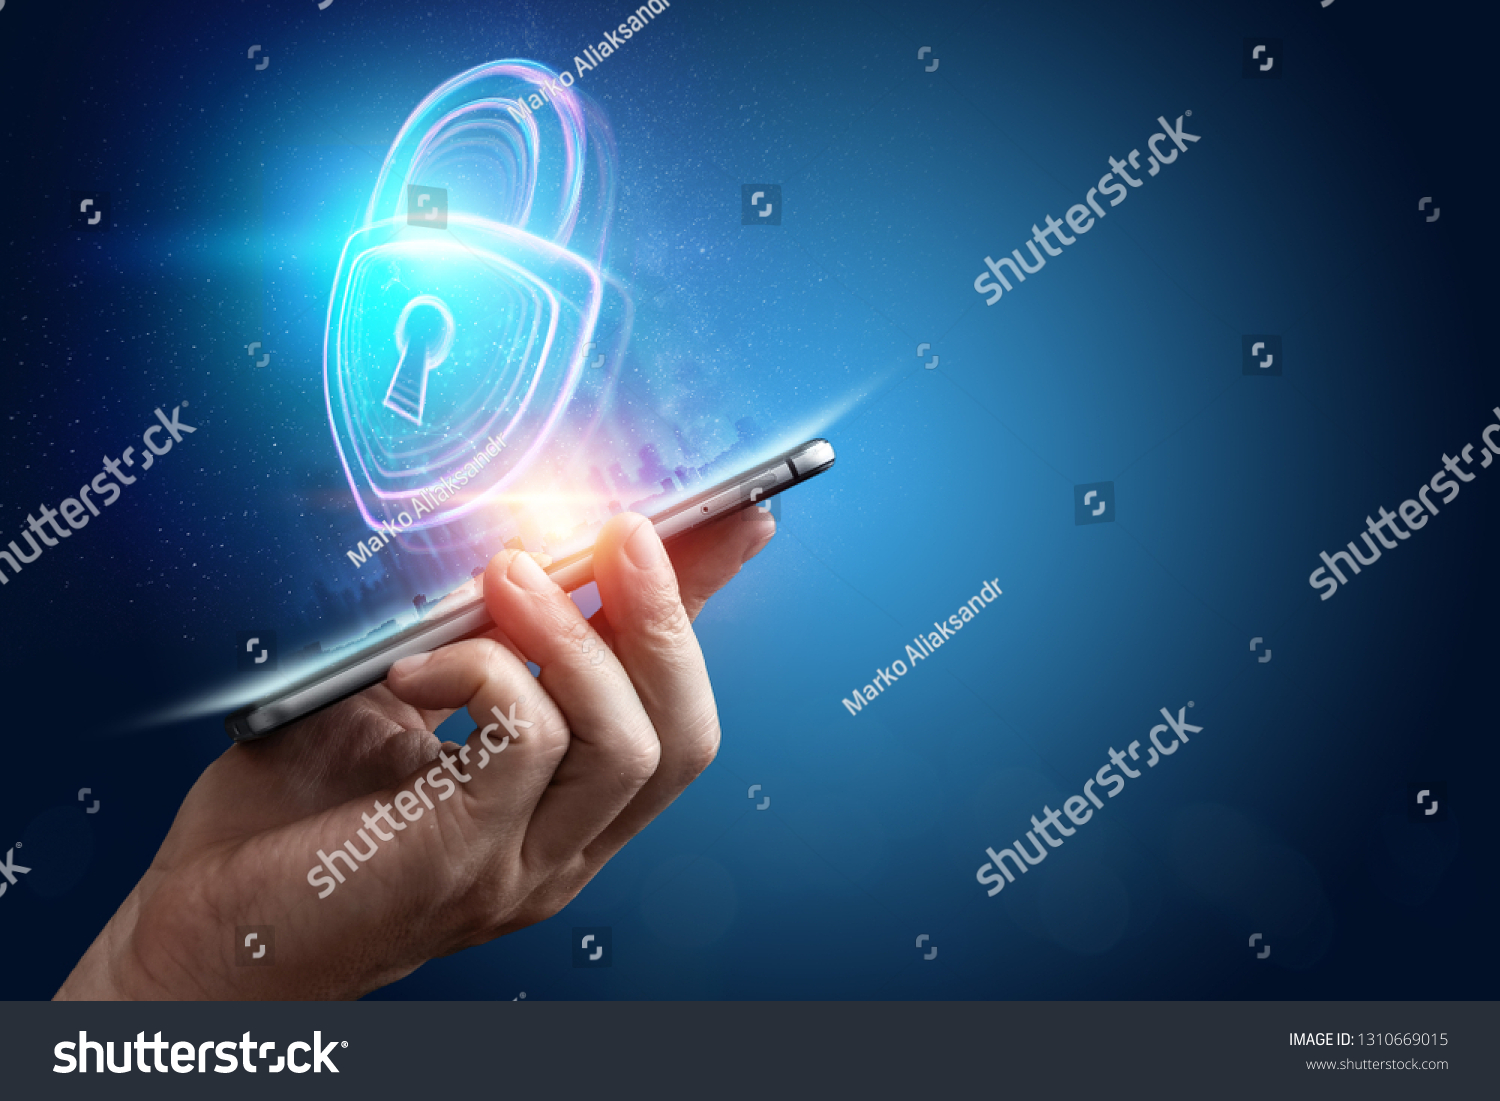 Creative, ultraviolet background, male hand and hologram lock. The concept of security, safe, data privacy, data protection, cryptocurrency, cyber otak. Mixed media. #1310669015